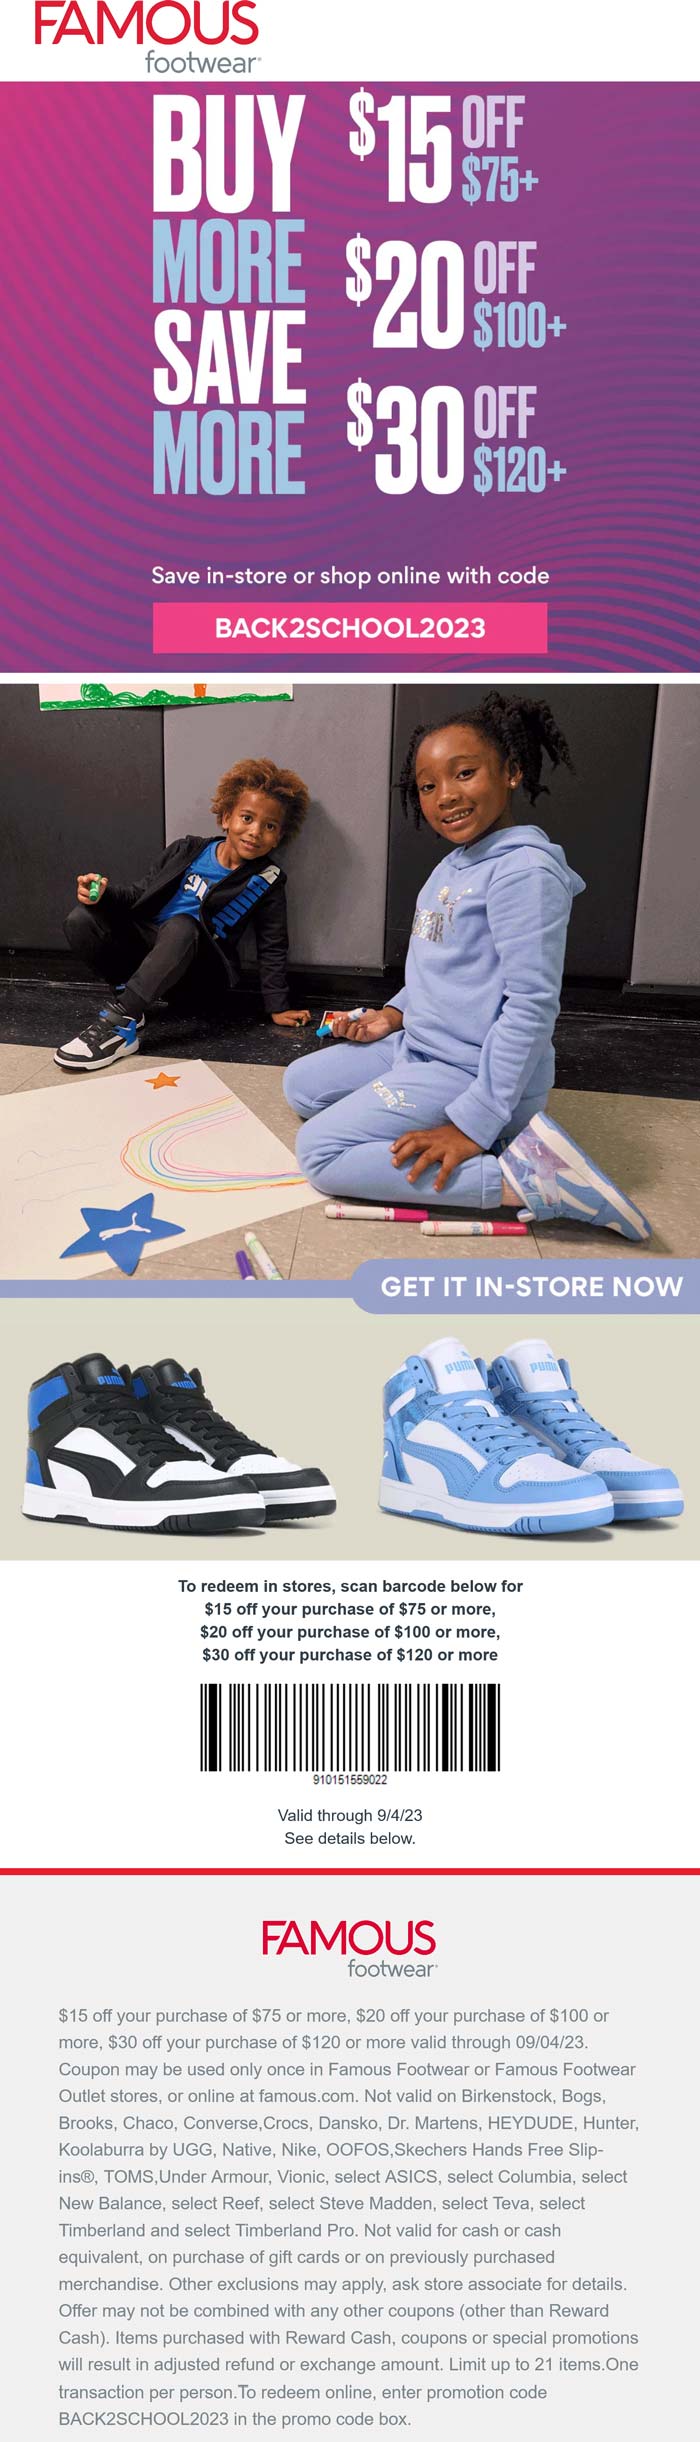 Famous Footwear stores Coupon  $15-$30 off $75+ at Famous Footwear, or online via promo code BACK2SCHOOL2023 #famousfootwear 